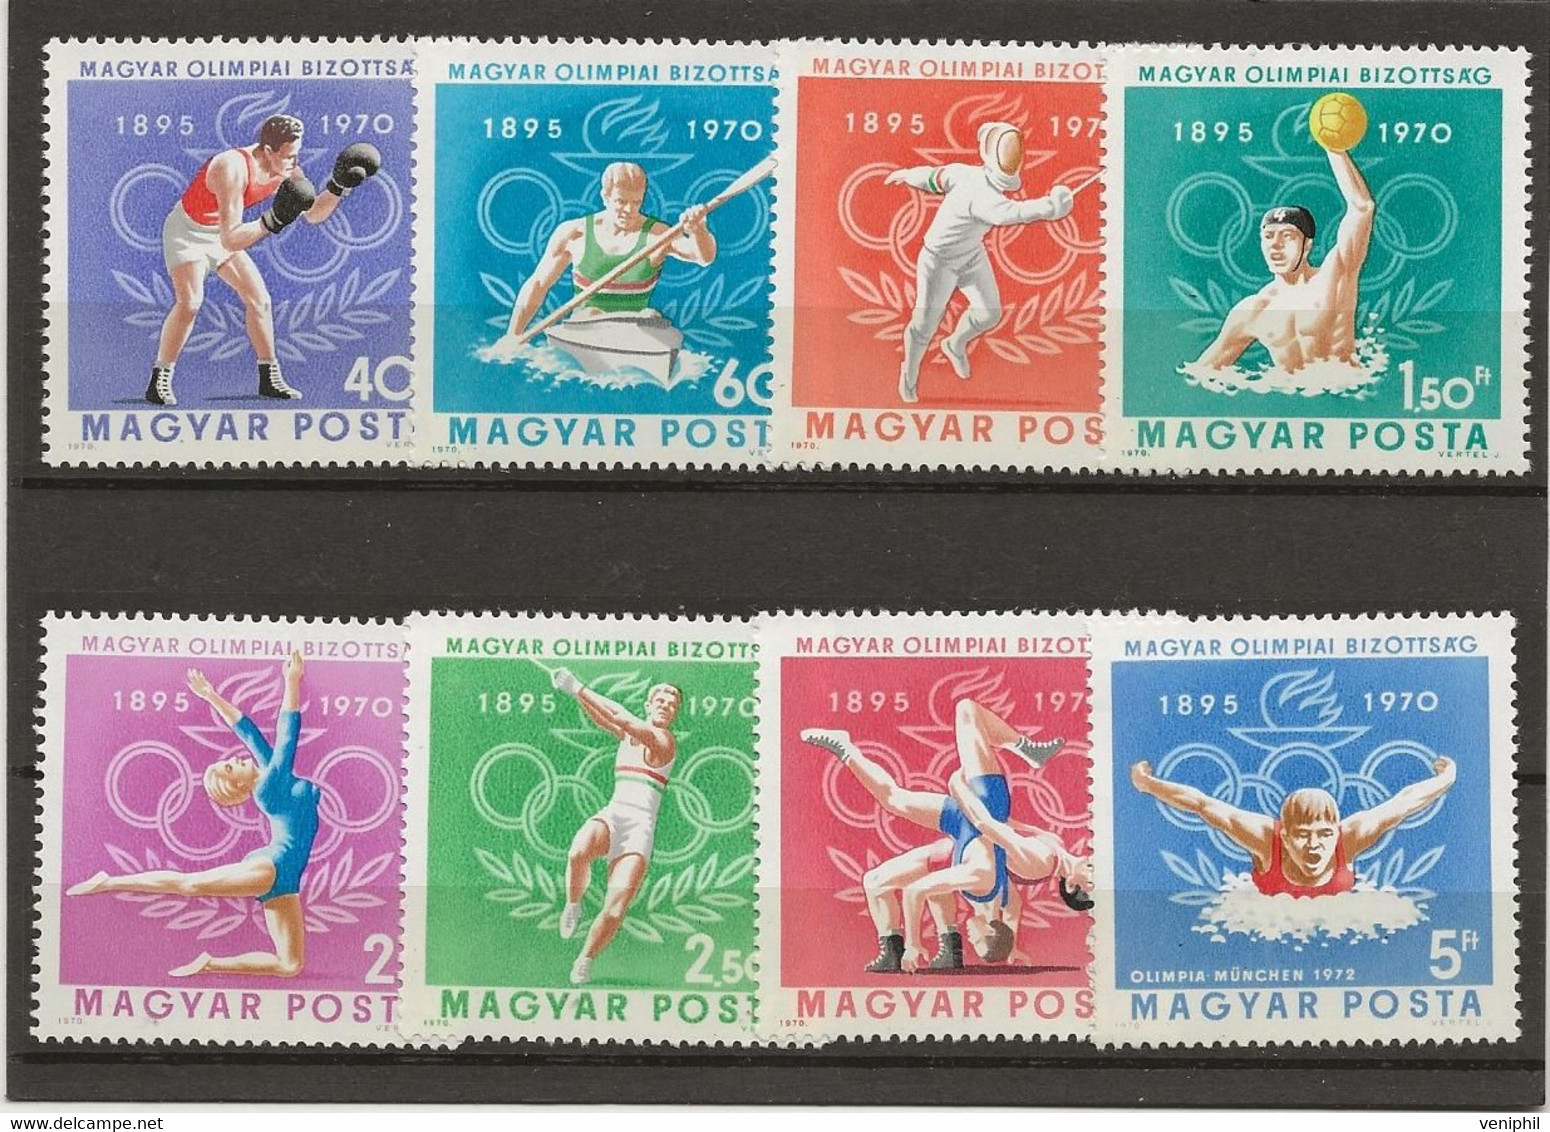 HONGRIE - SERIE SPORTS OLYMPIQUES  N° 2120 A 2127- NEUF INFIME CHARNIERE - ANNEE 1970 - Unused Stamps